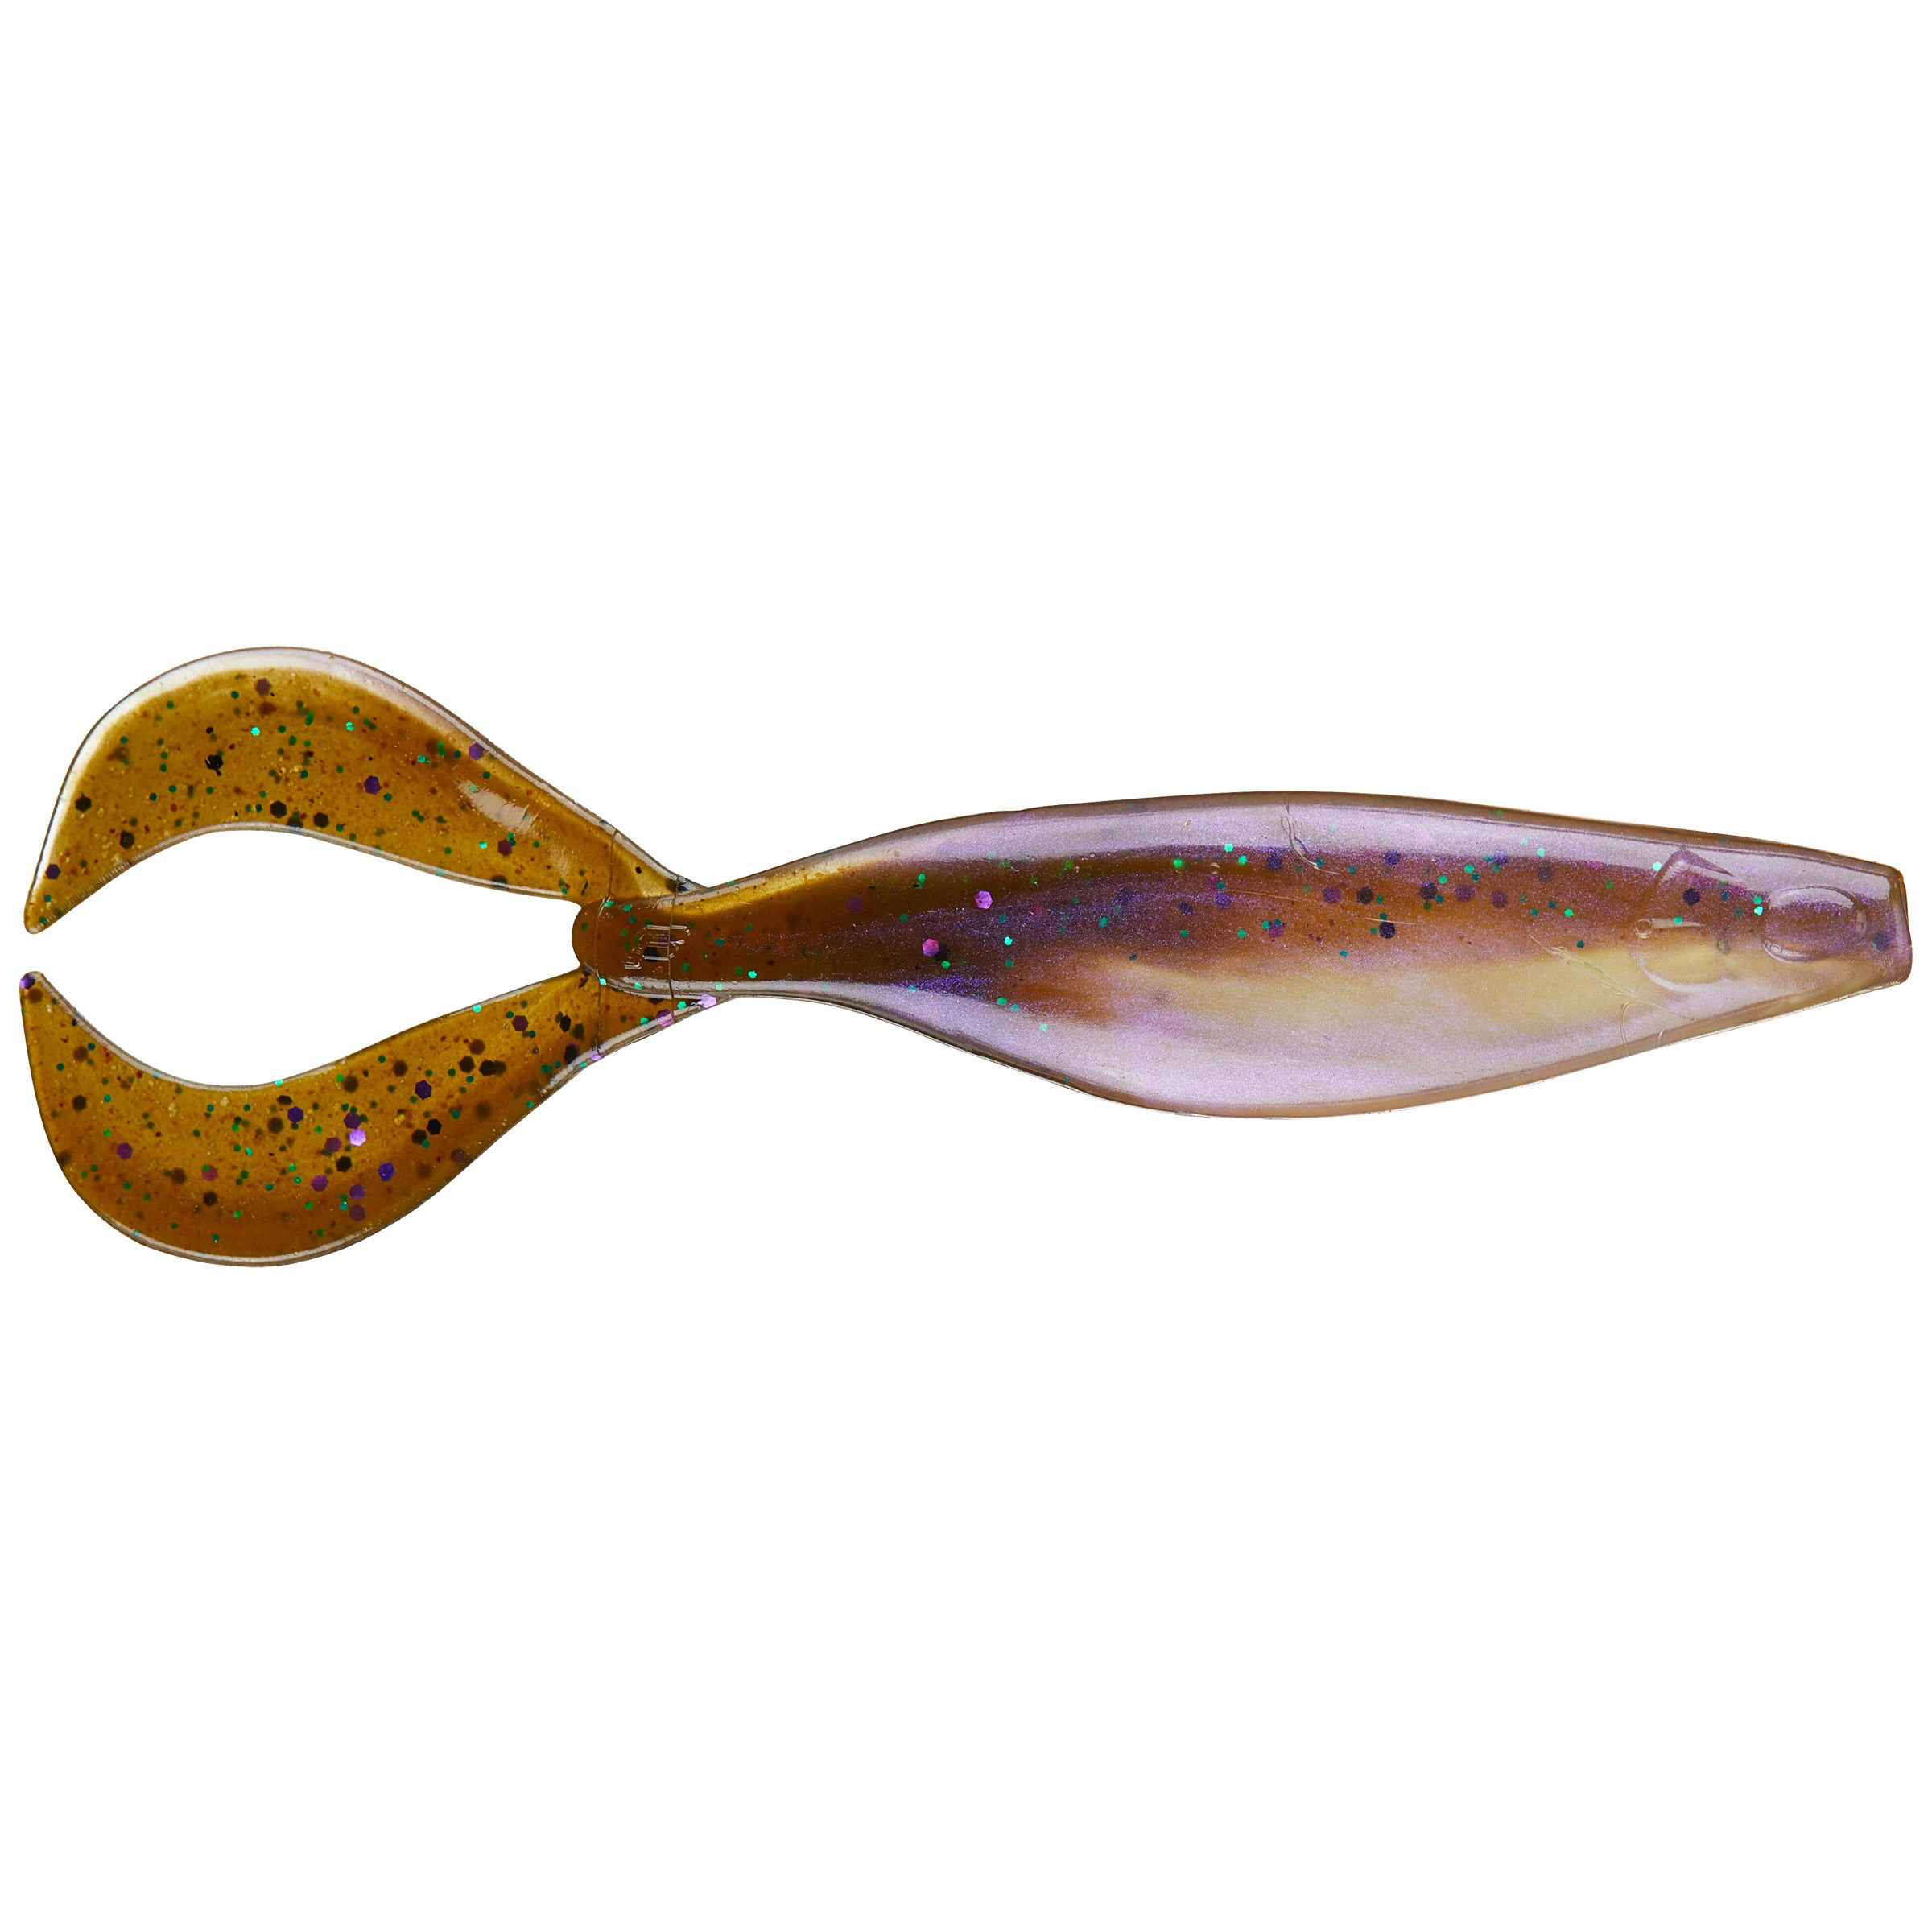 Berkley Powerbait - The Deal Swimbait - Twin Tail - Choose Size and Color -  